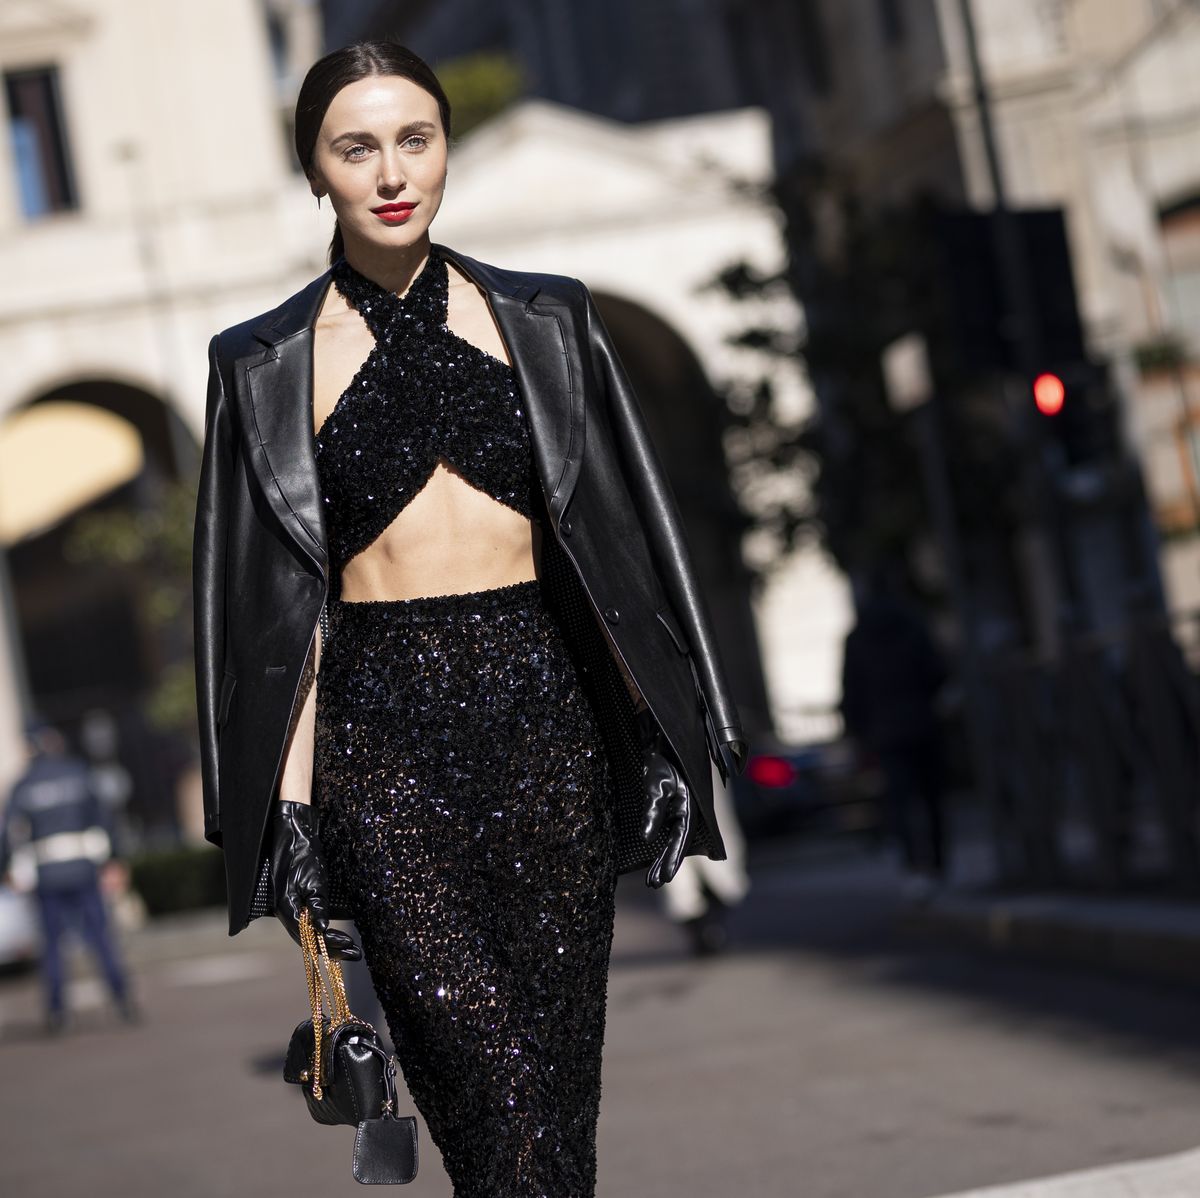 9 Tips on How to Look Expensive + What to Avoid - MY CHIC OBSESSION